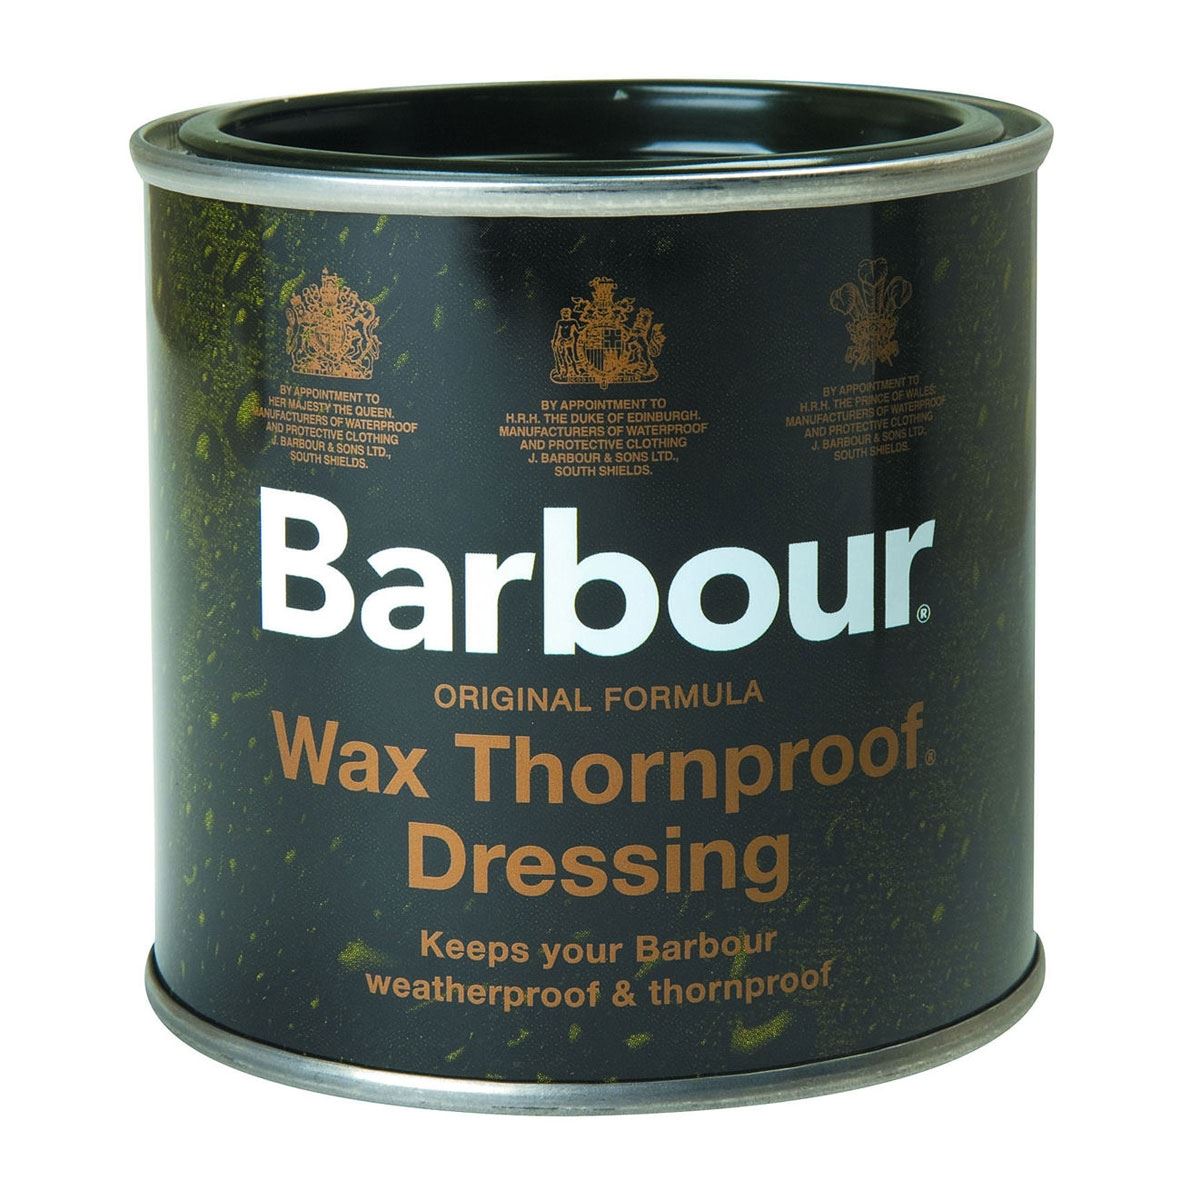 Barbour Wax Thornproof Dressing Questions & Answers